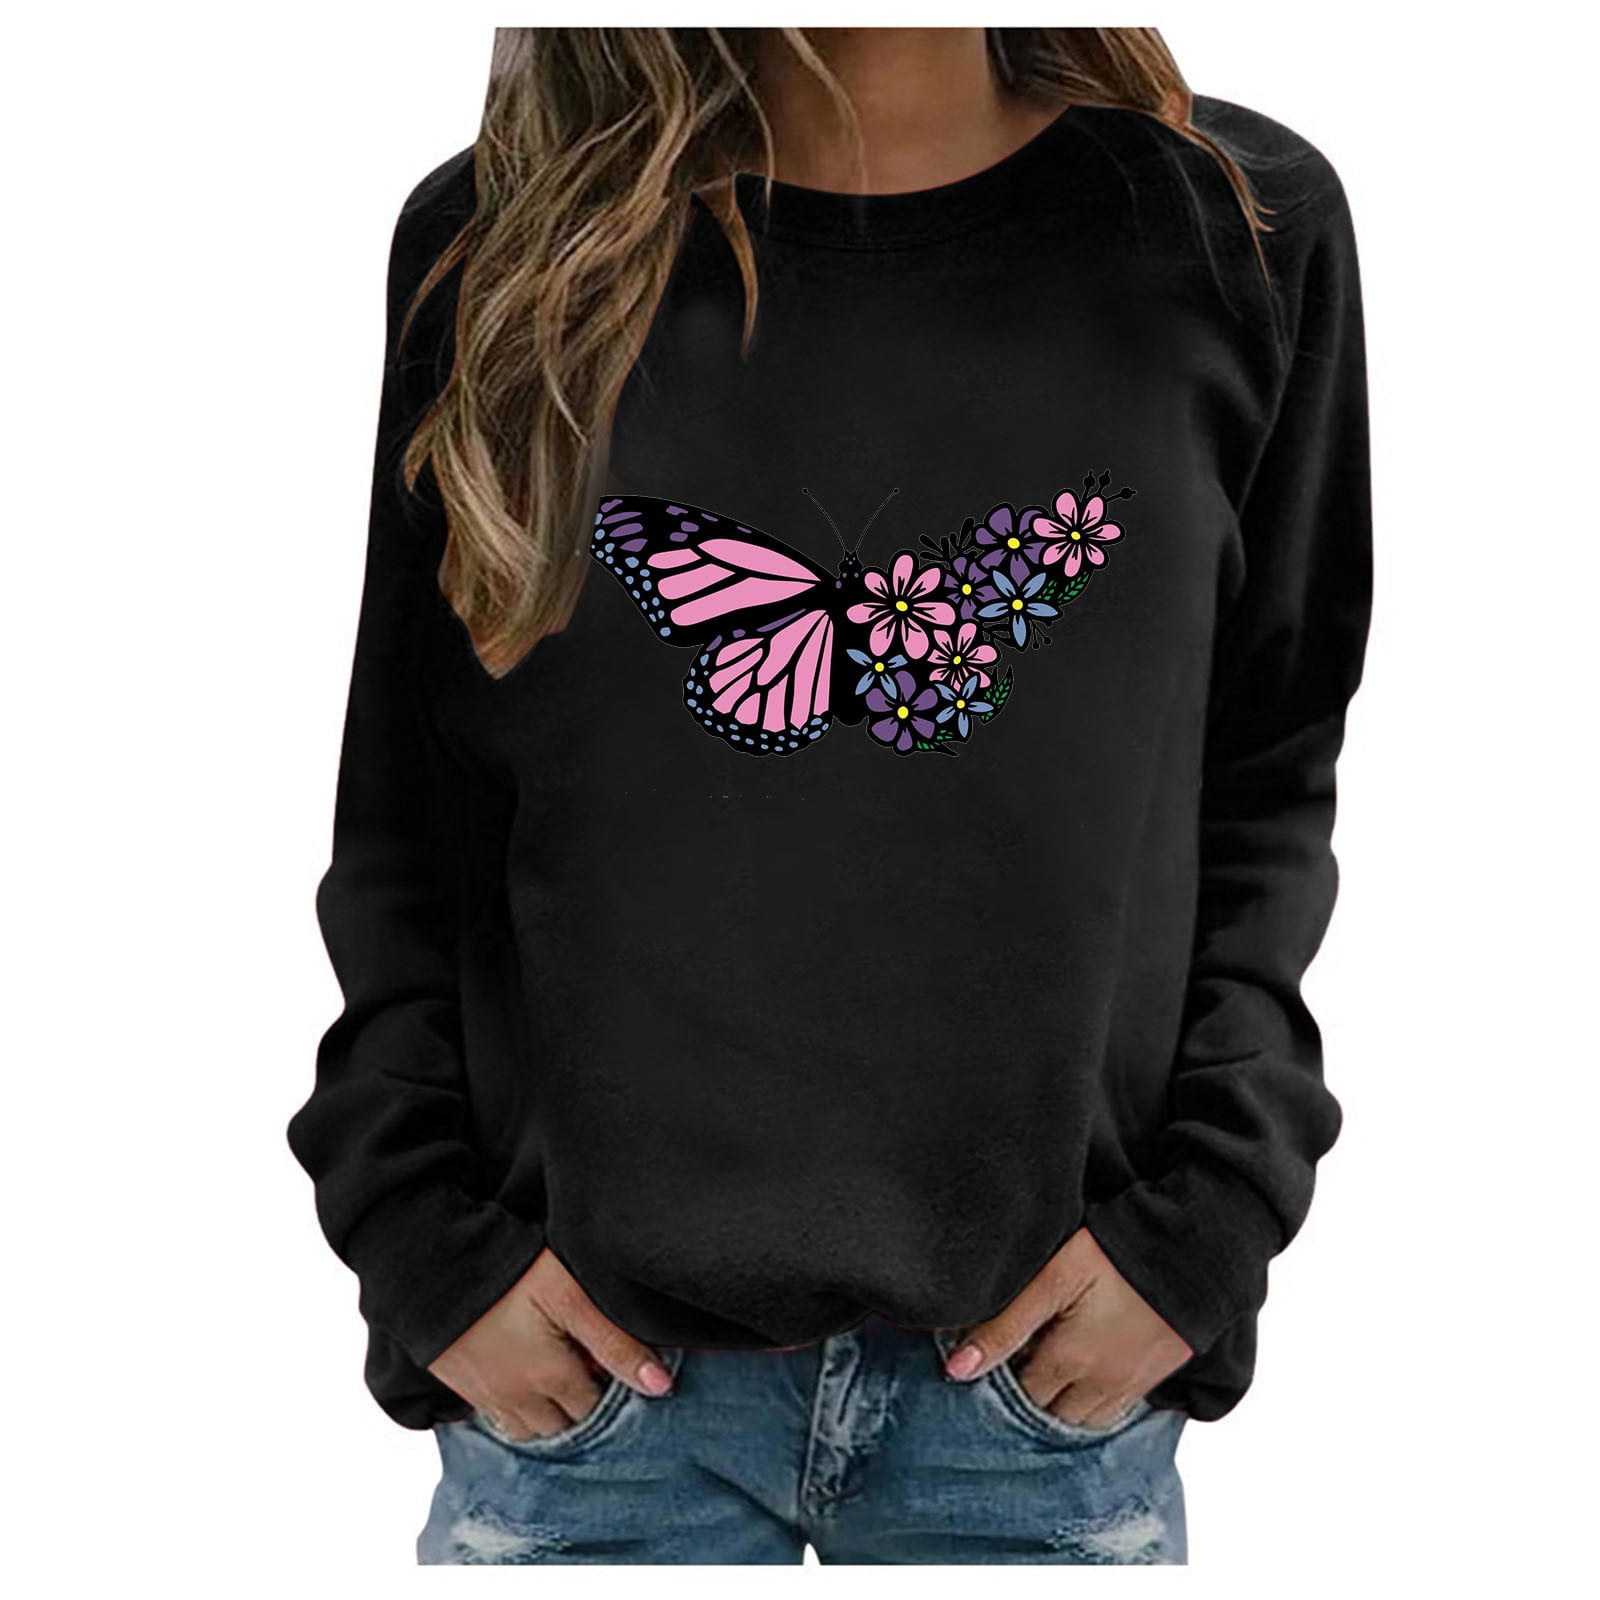 Graphic Sweatshirts for Womens Spring Tops Casual Tie Dye Butterfly Animal Print Shirts Trendy Long Sleeve Blouse Tunic 